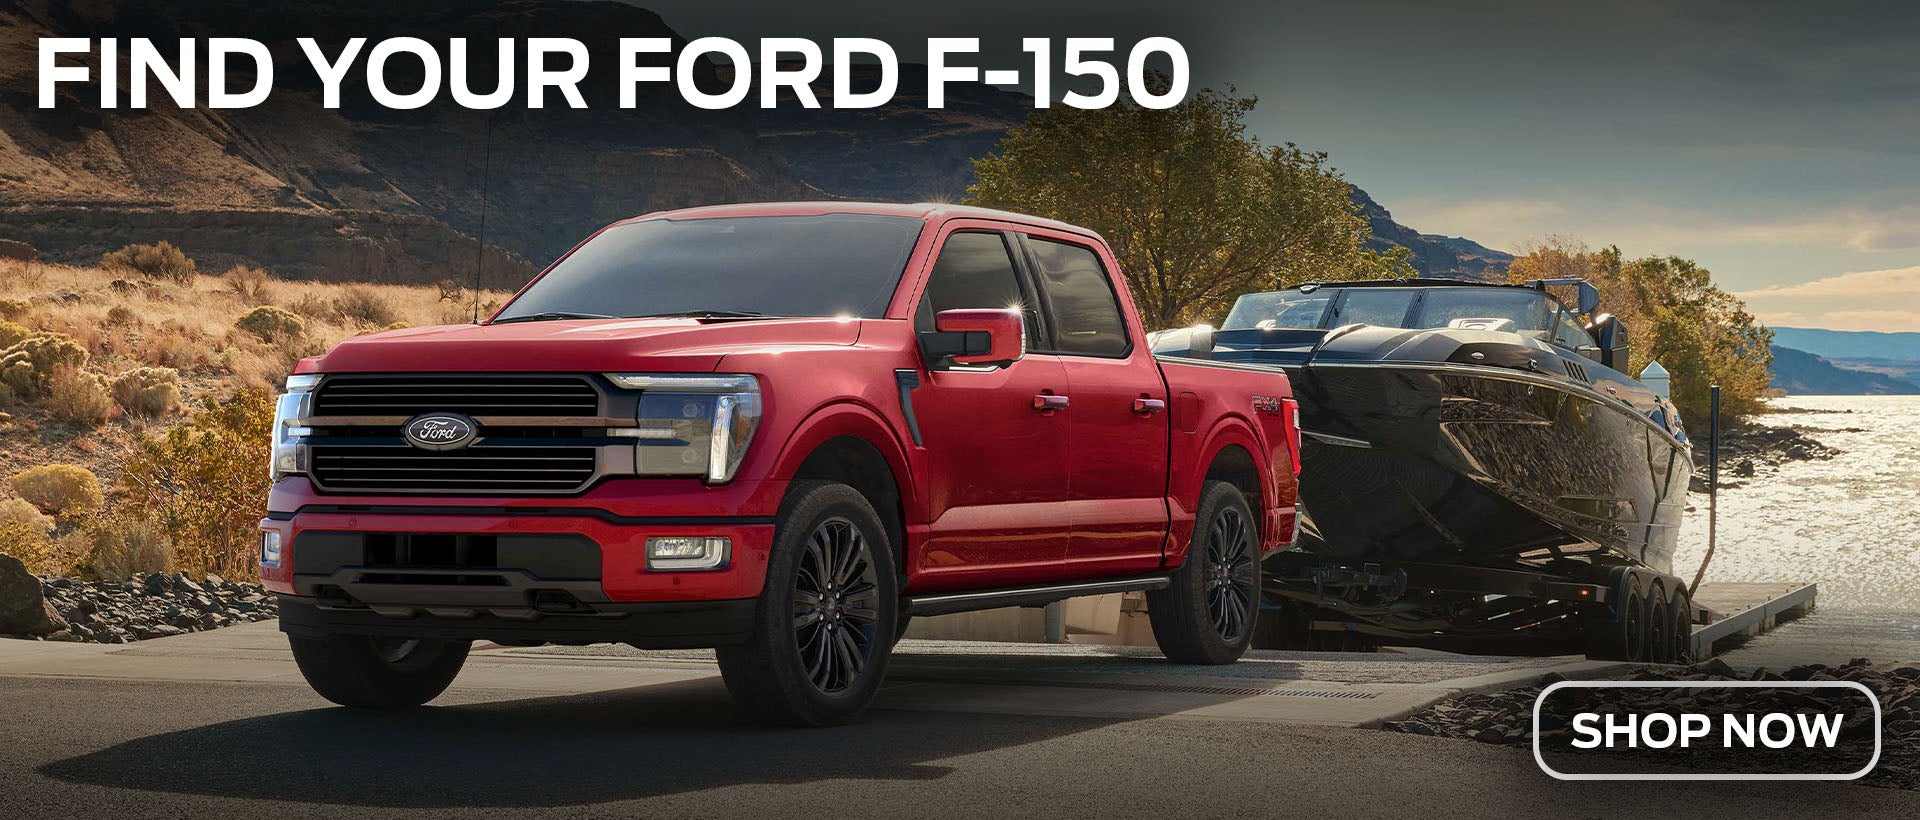 Ford Truck Buying Guide